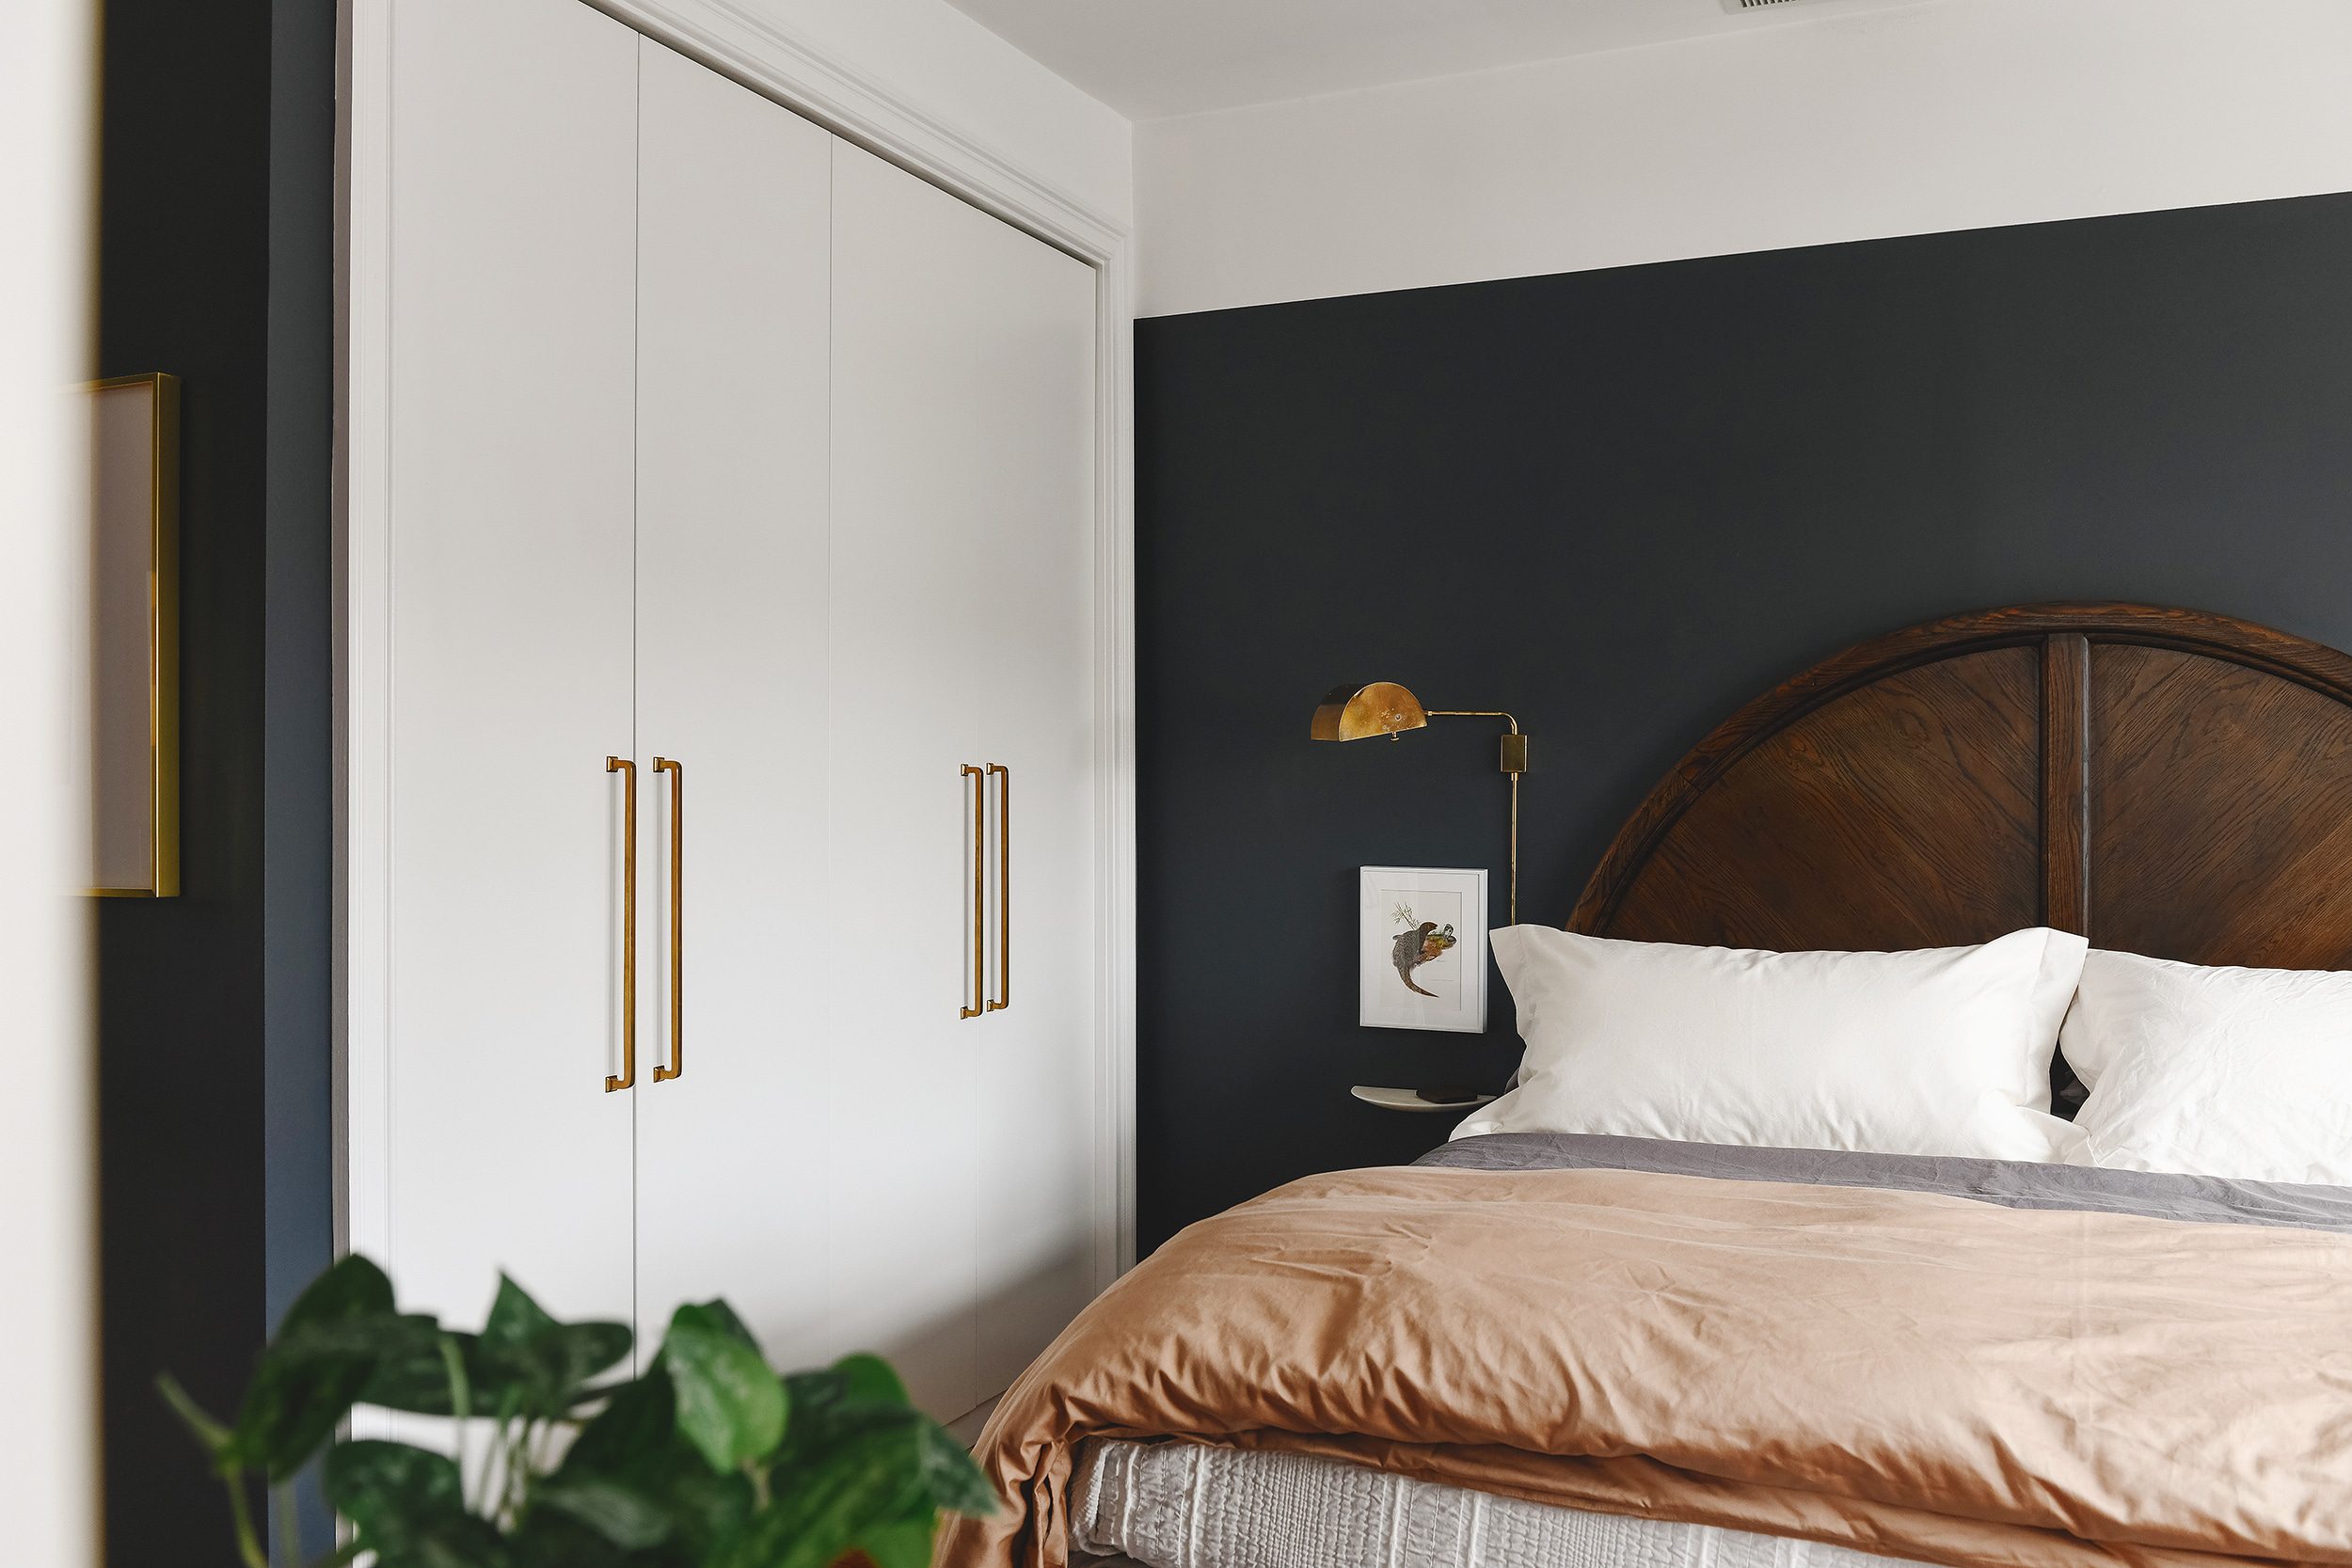 Dark and moody bedroom with wall of closets // via Yellow Brick Home